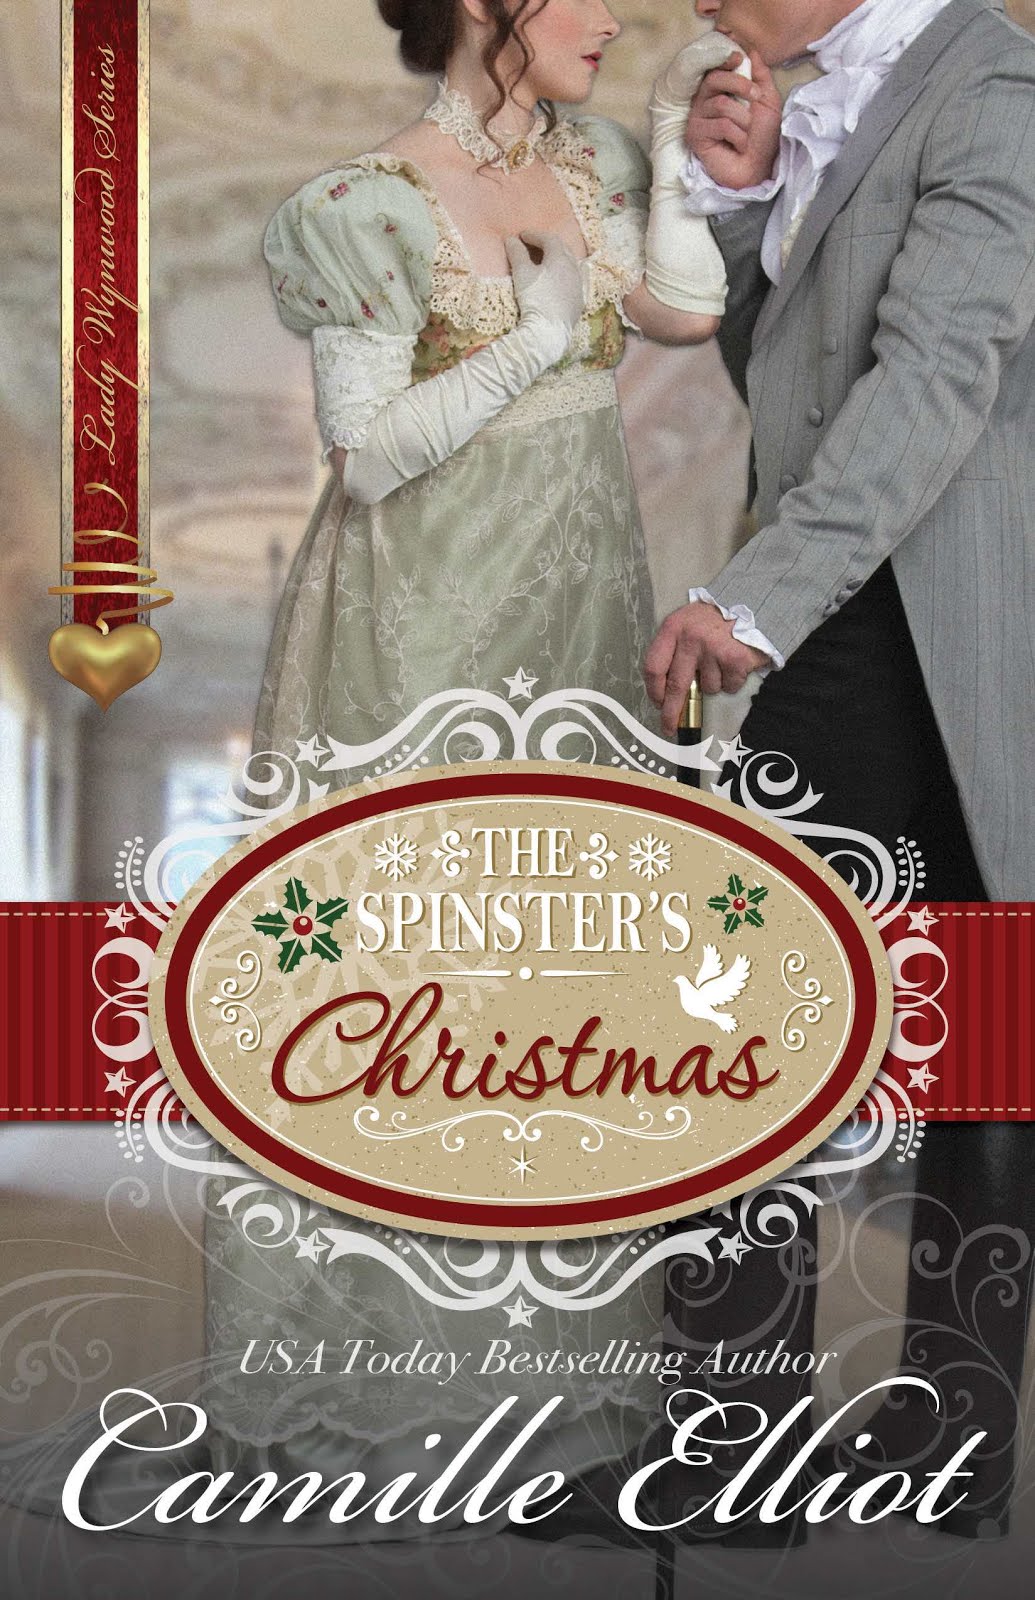 THE SPINSTER'S CHRISTMAS by Camille Elliot